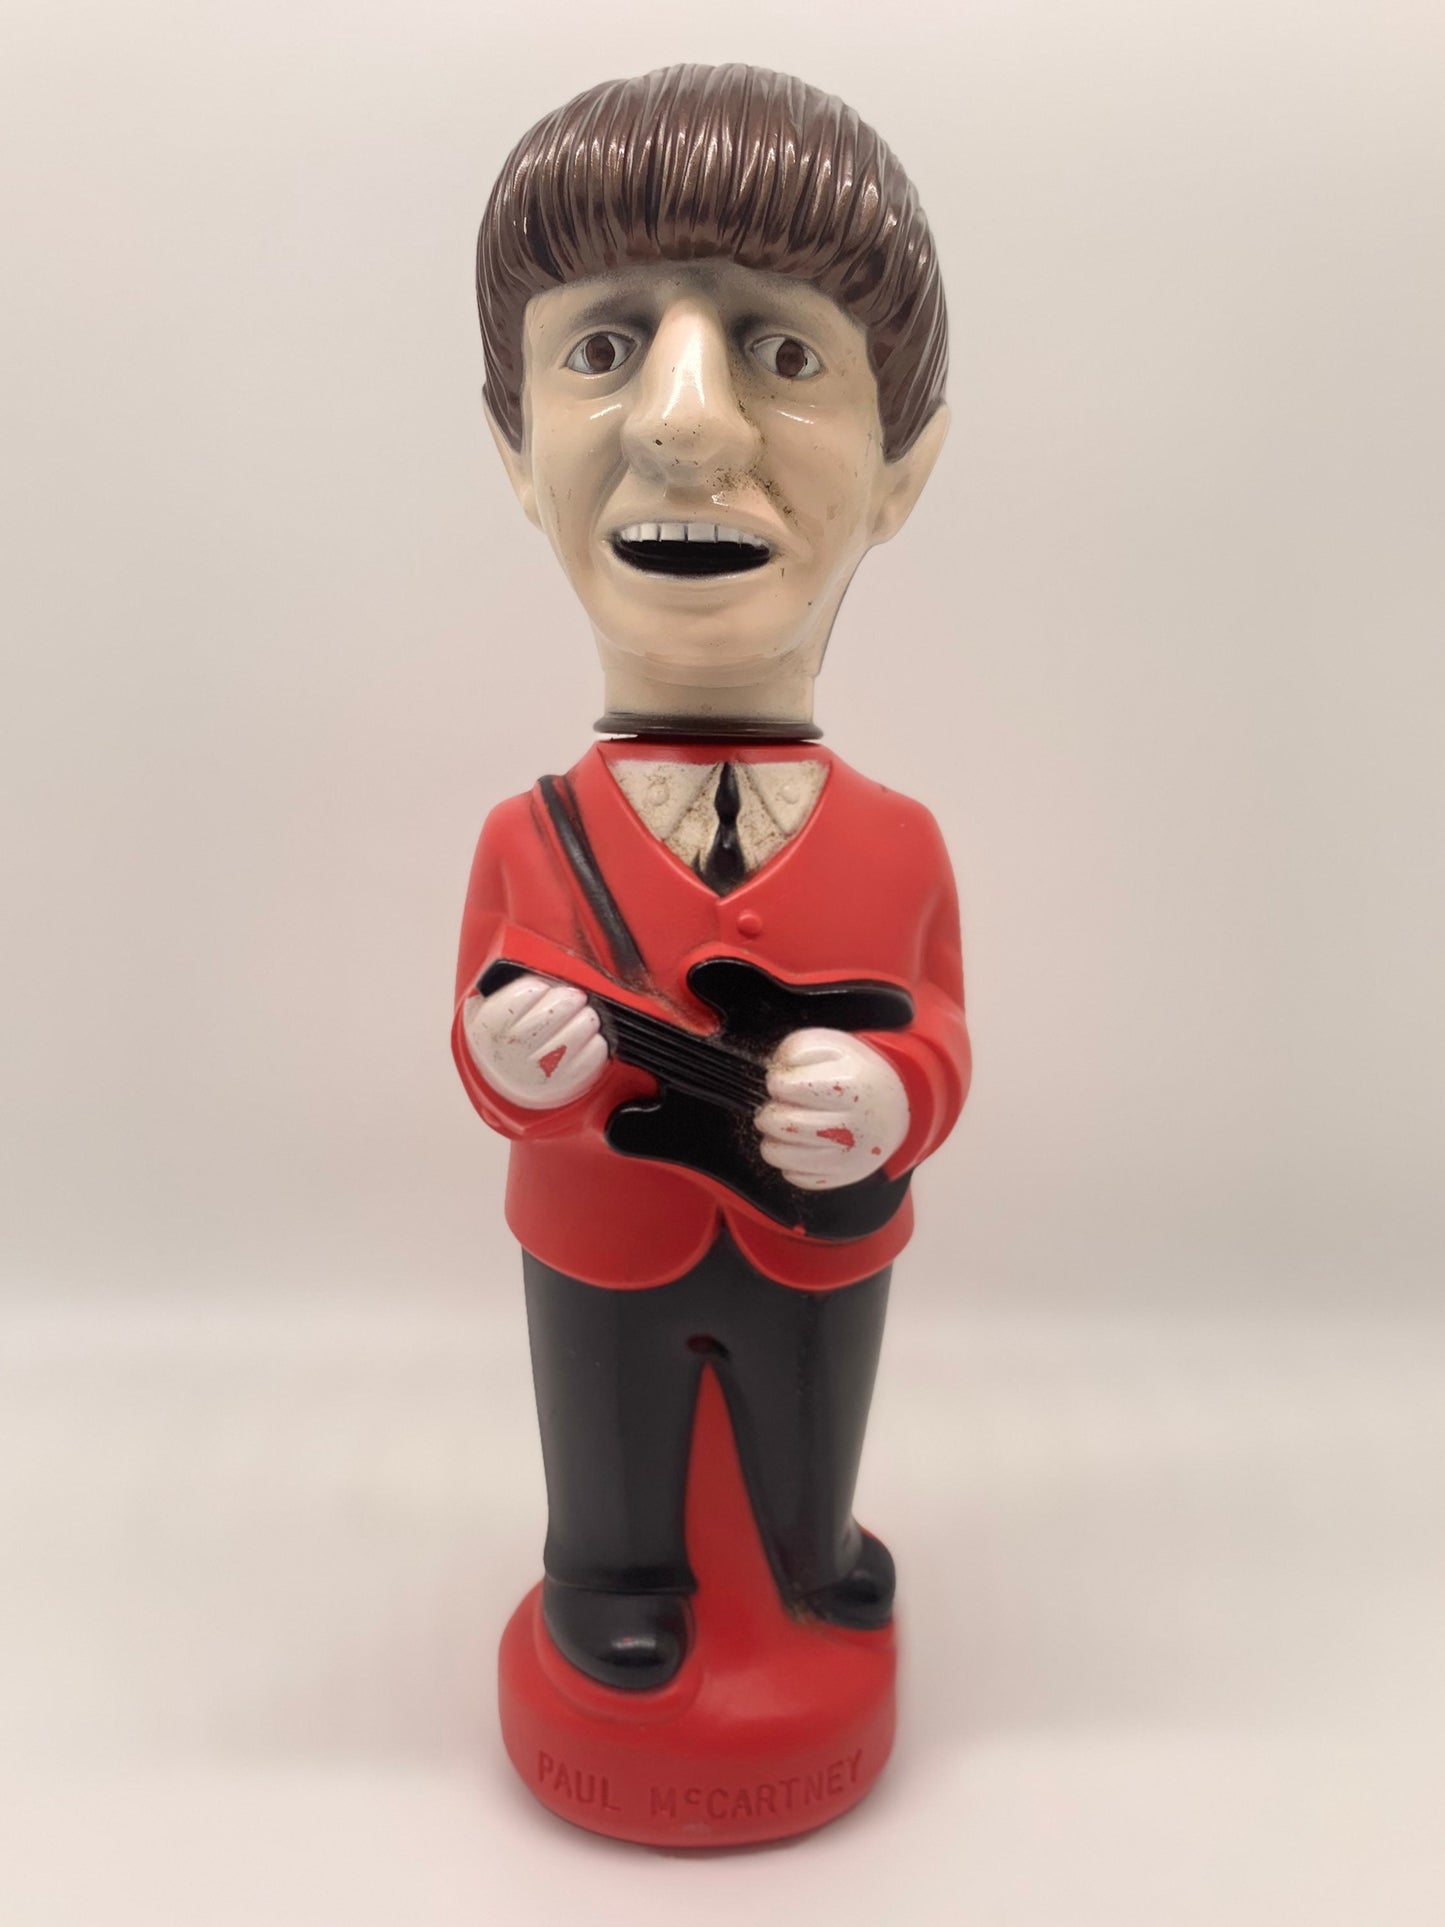 NEMS Paul McCartney and Ringo Starr The Beatles Collectable Soaky Soap Bottle Figurine Vintage Memorabilia Perfect Birthday Gift Band Merch